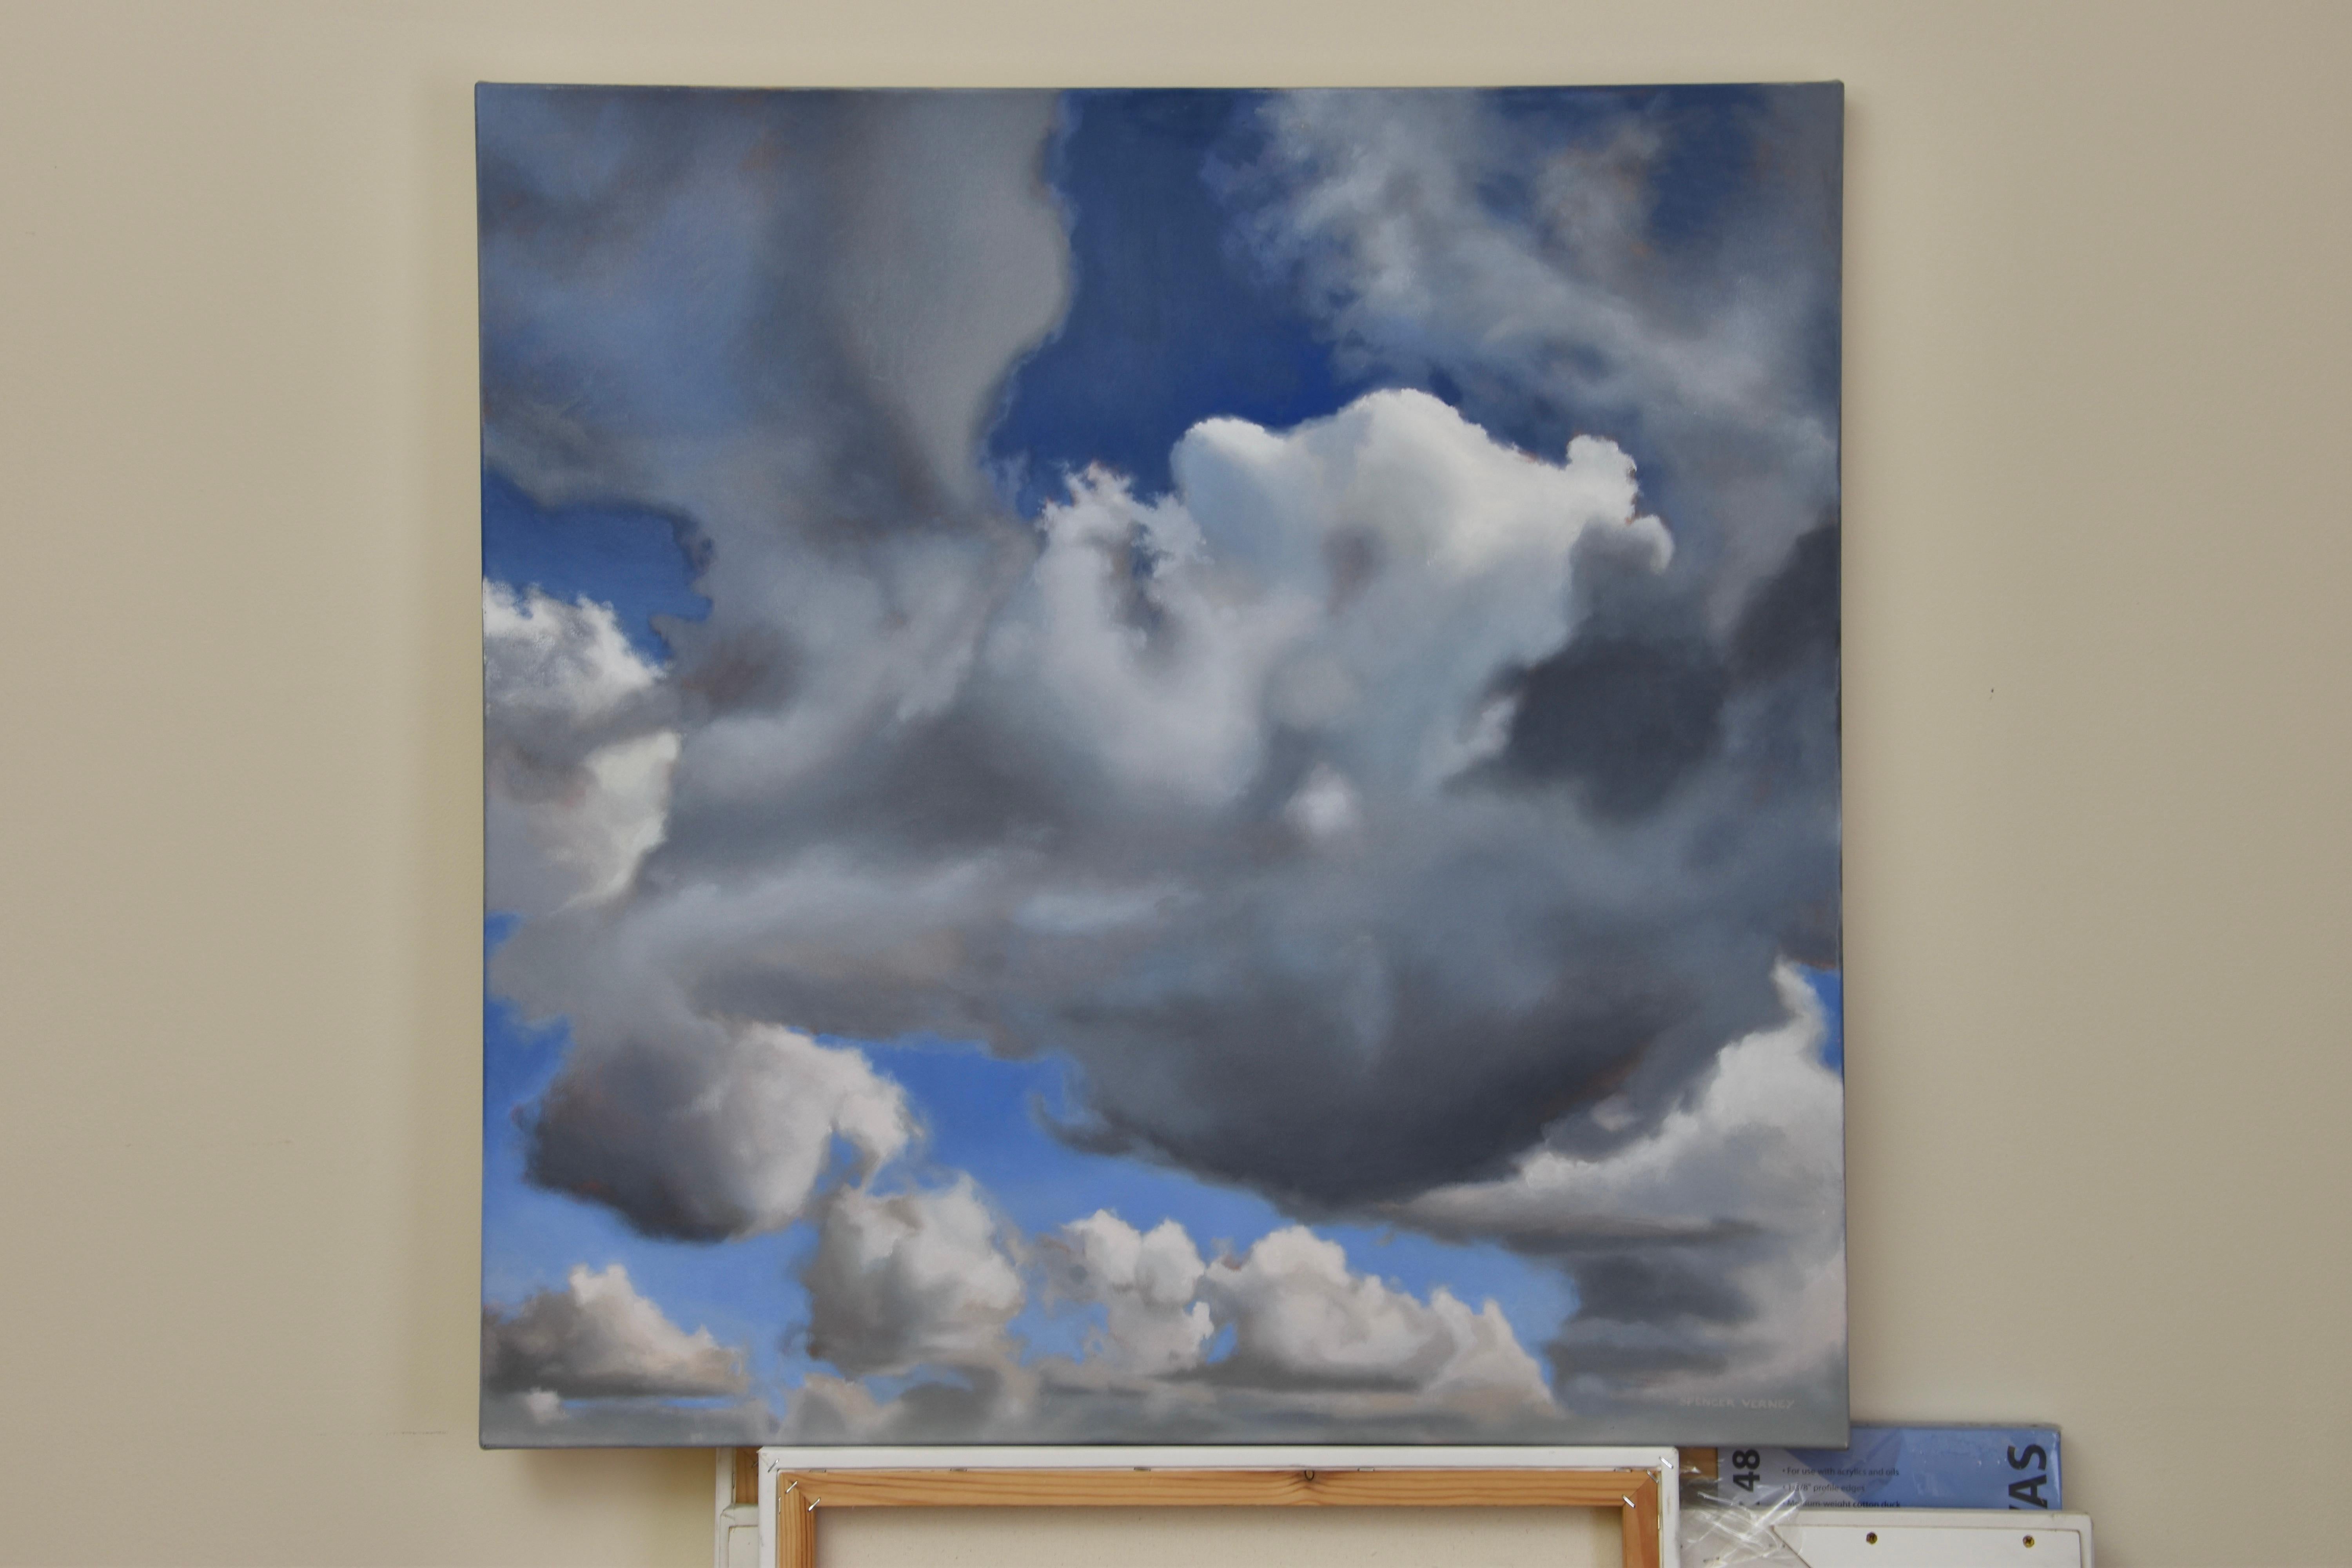 Cloudveil - Painting by Spencer Verney